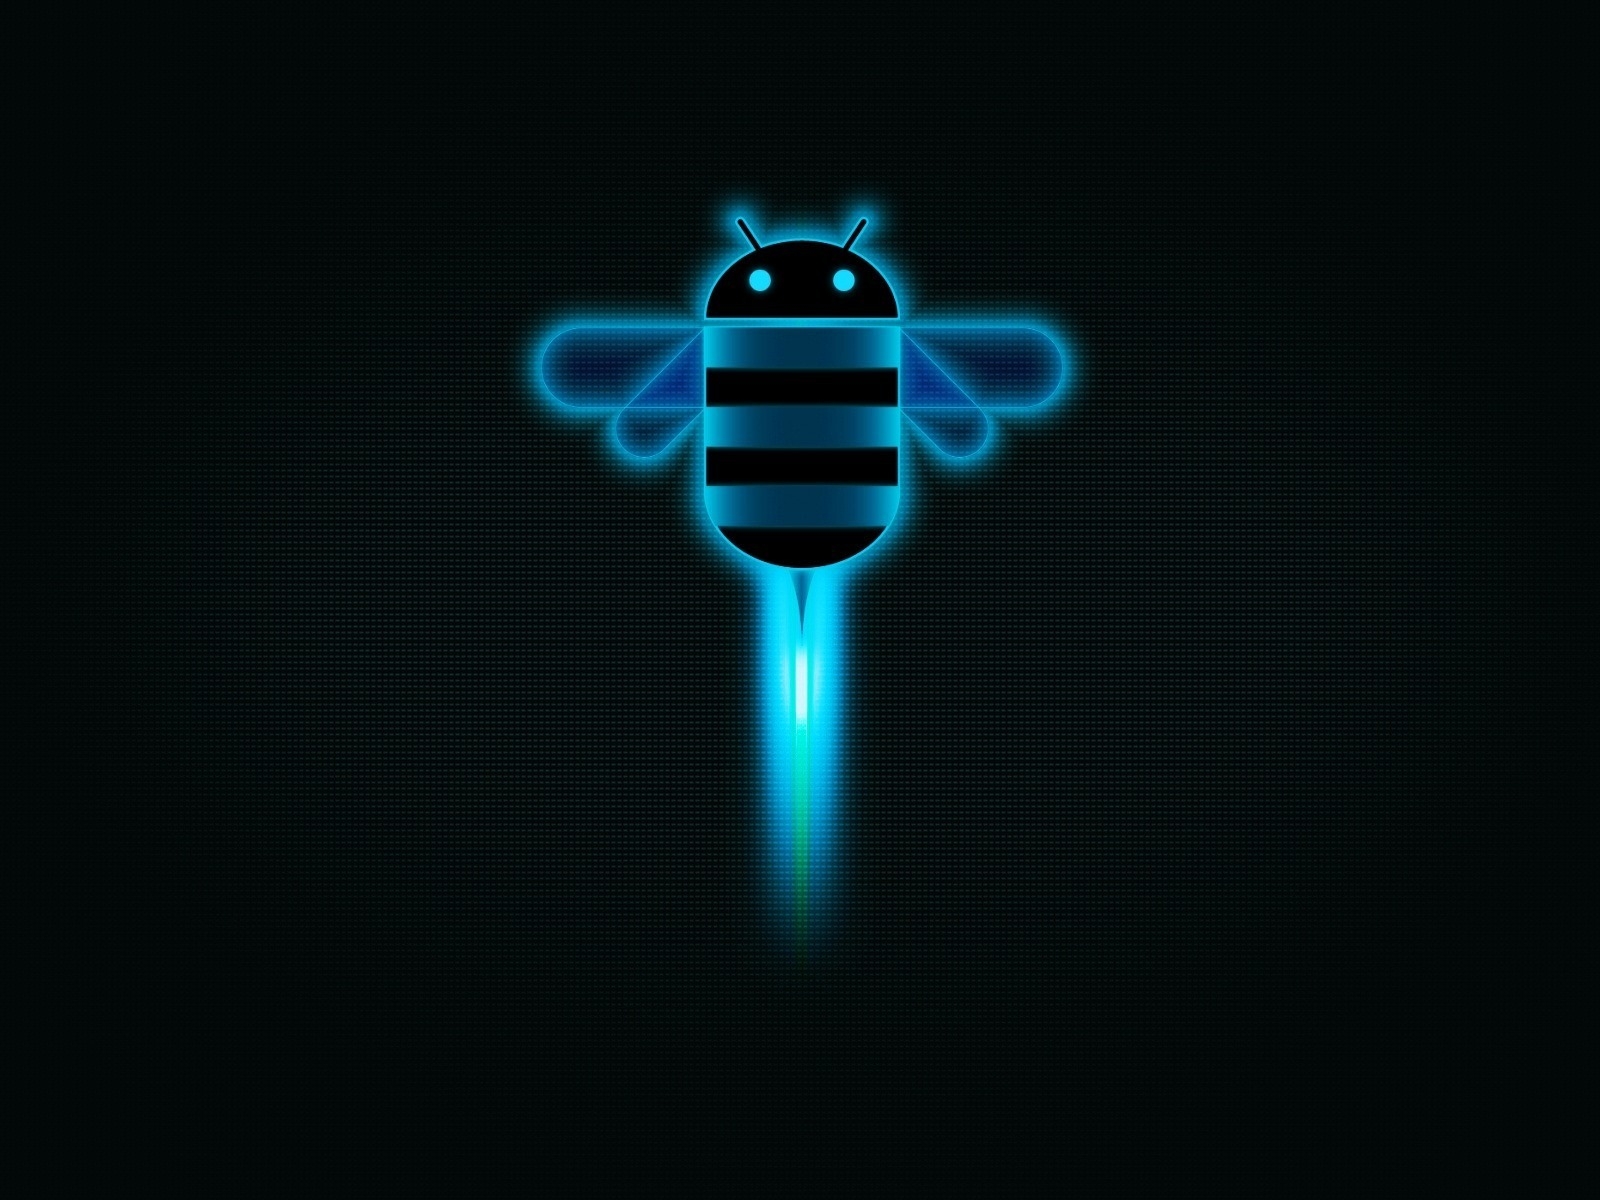 Honeycomb Android for 1600 x 1200 resolution